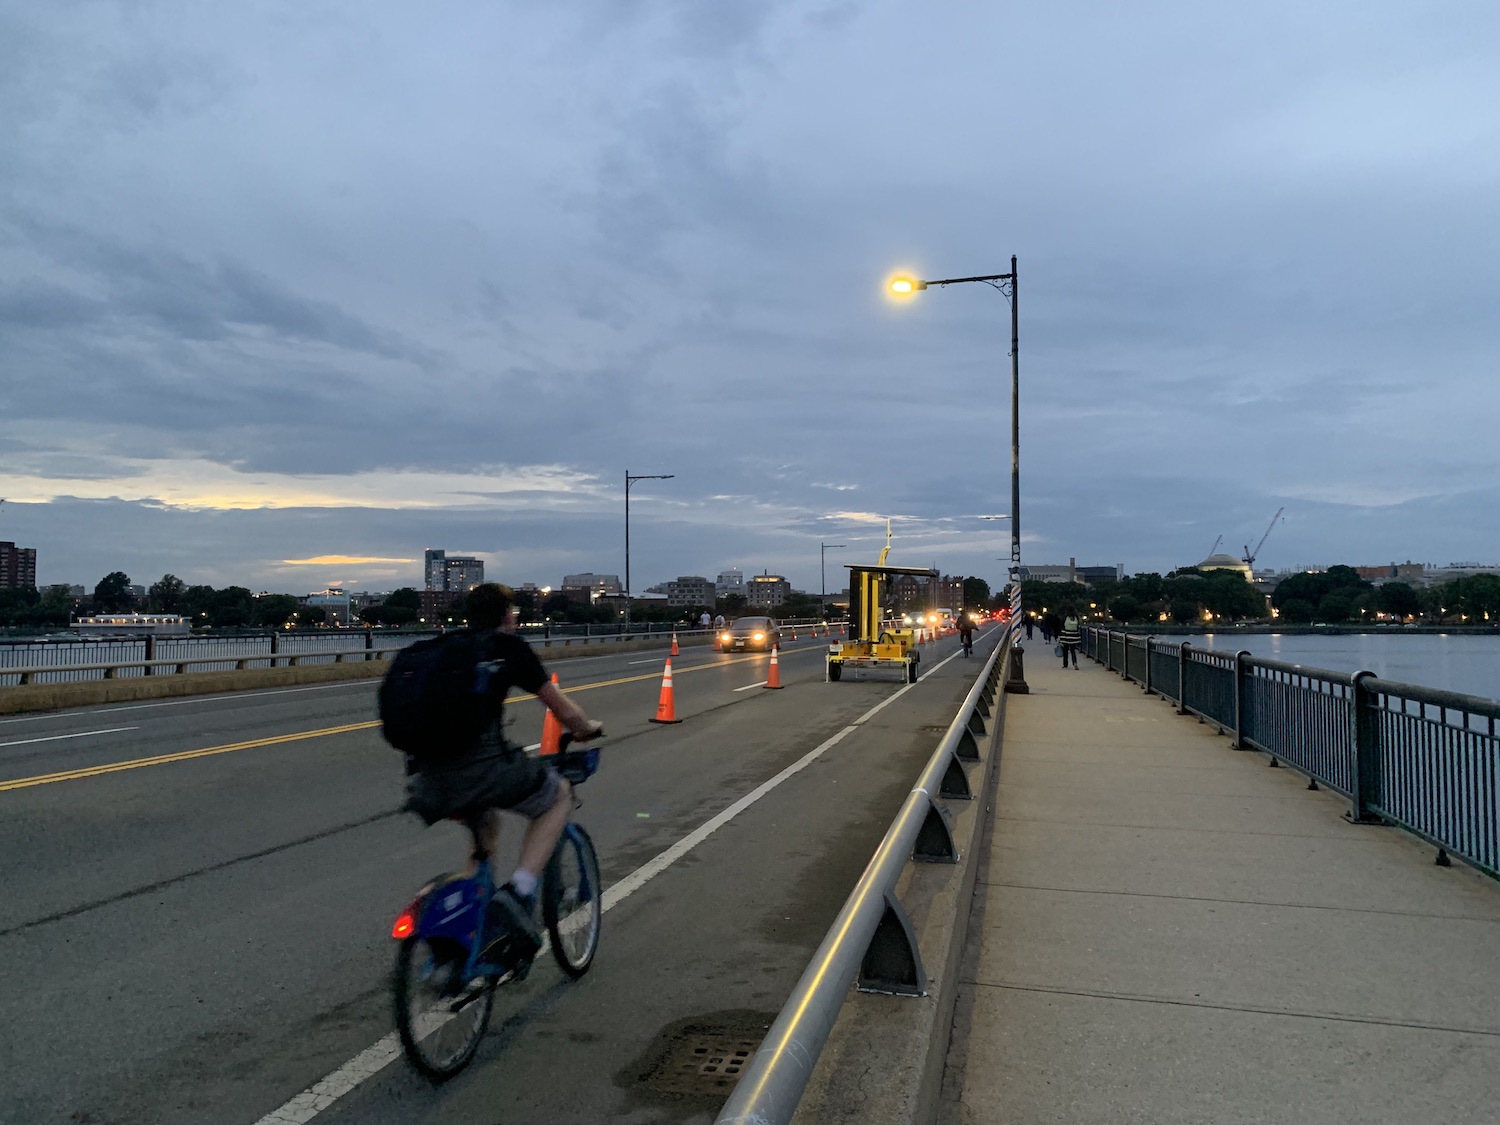 A biker zooming across the Harvard bridge. Bits of orange peek out from blue-gray sky and the street lamps feel beautifully warm.